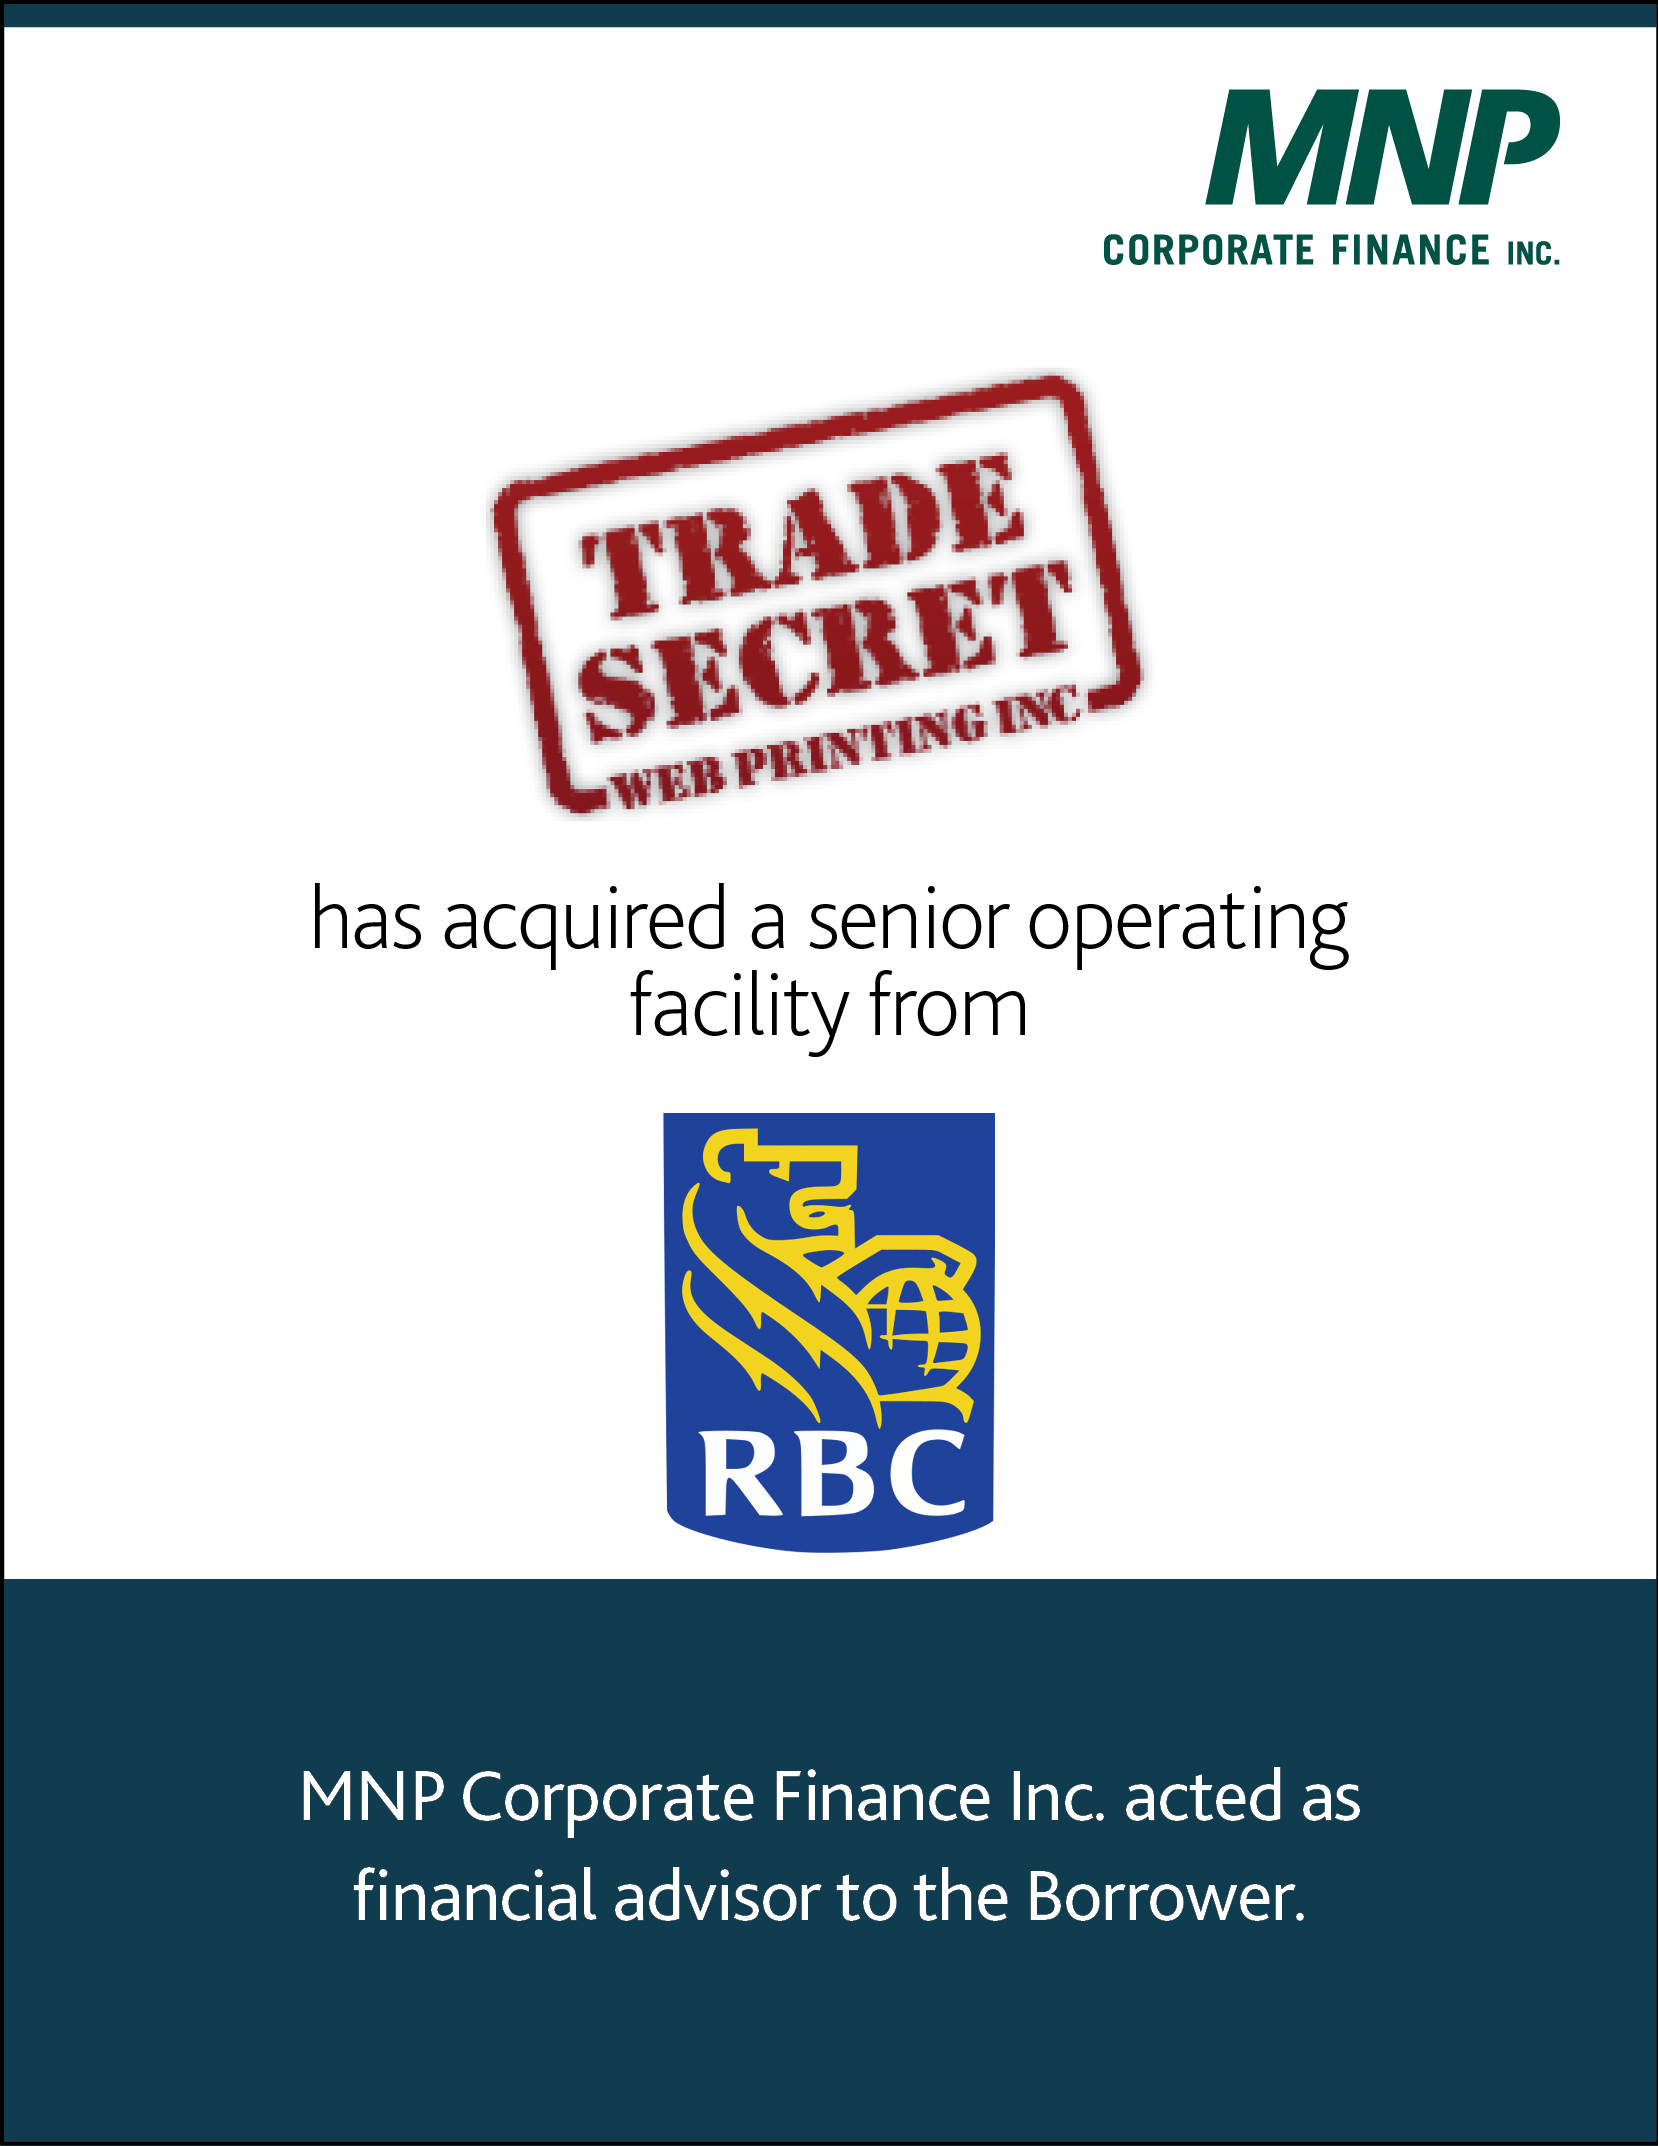 Trade Secret Web Printing Inc has acquired a senior operating facility from RBC